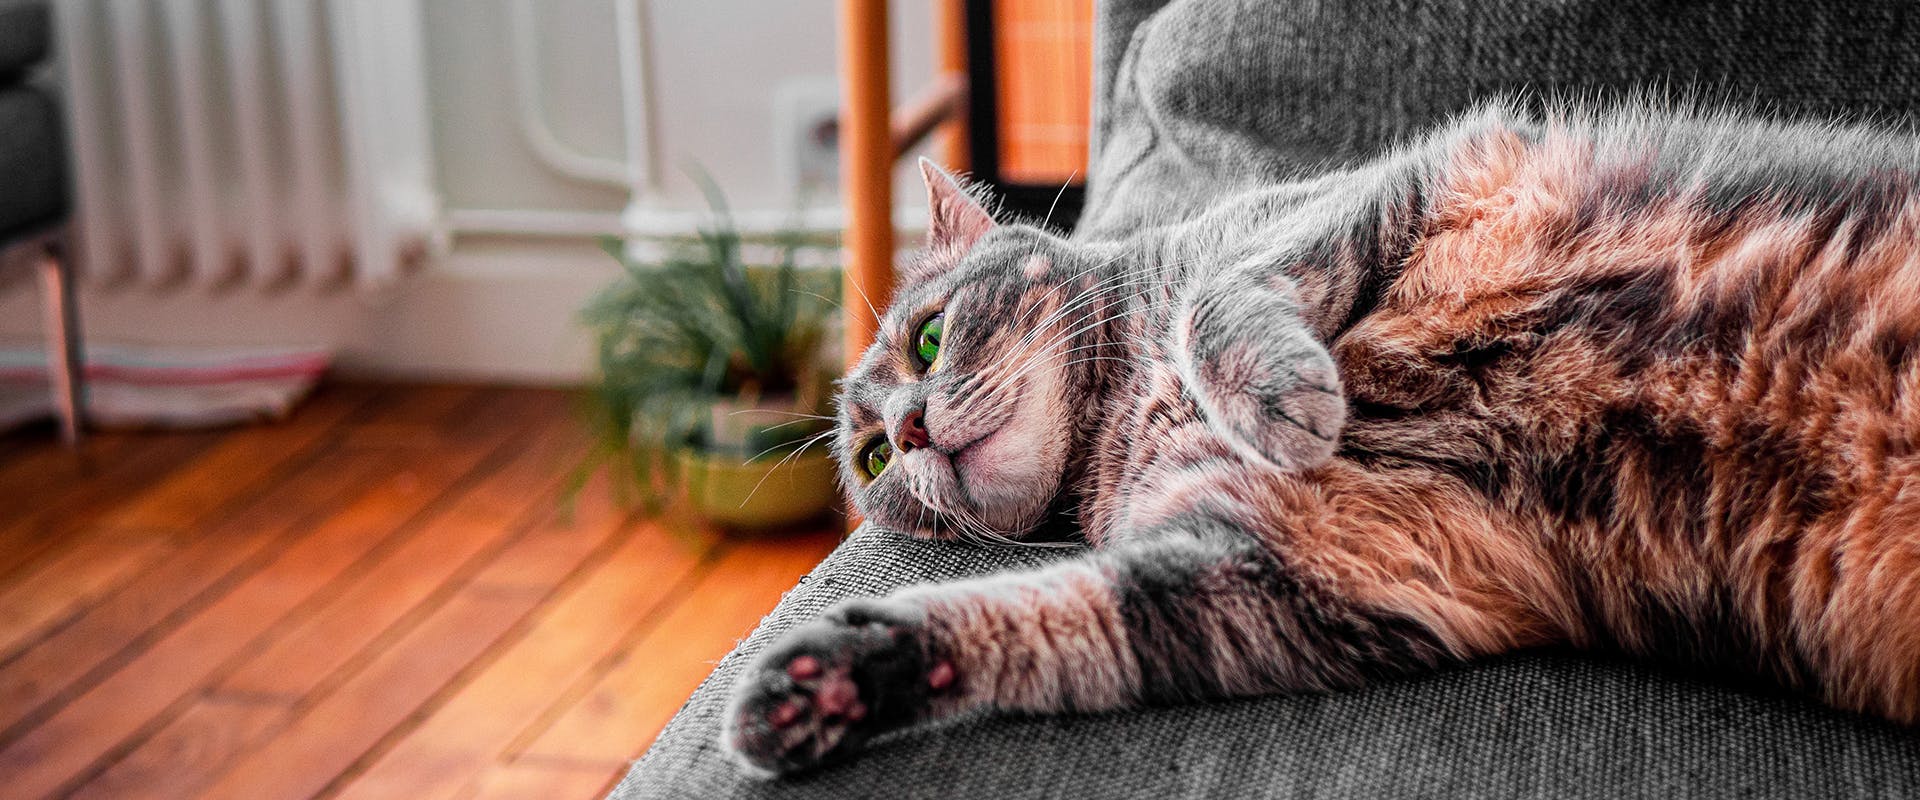 A large cat lounging on a sofa